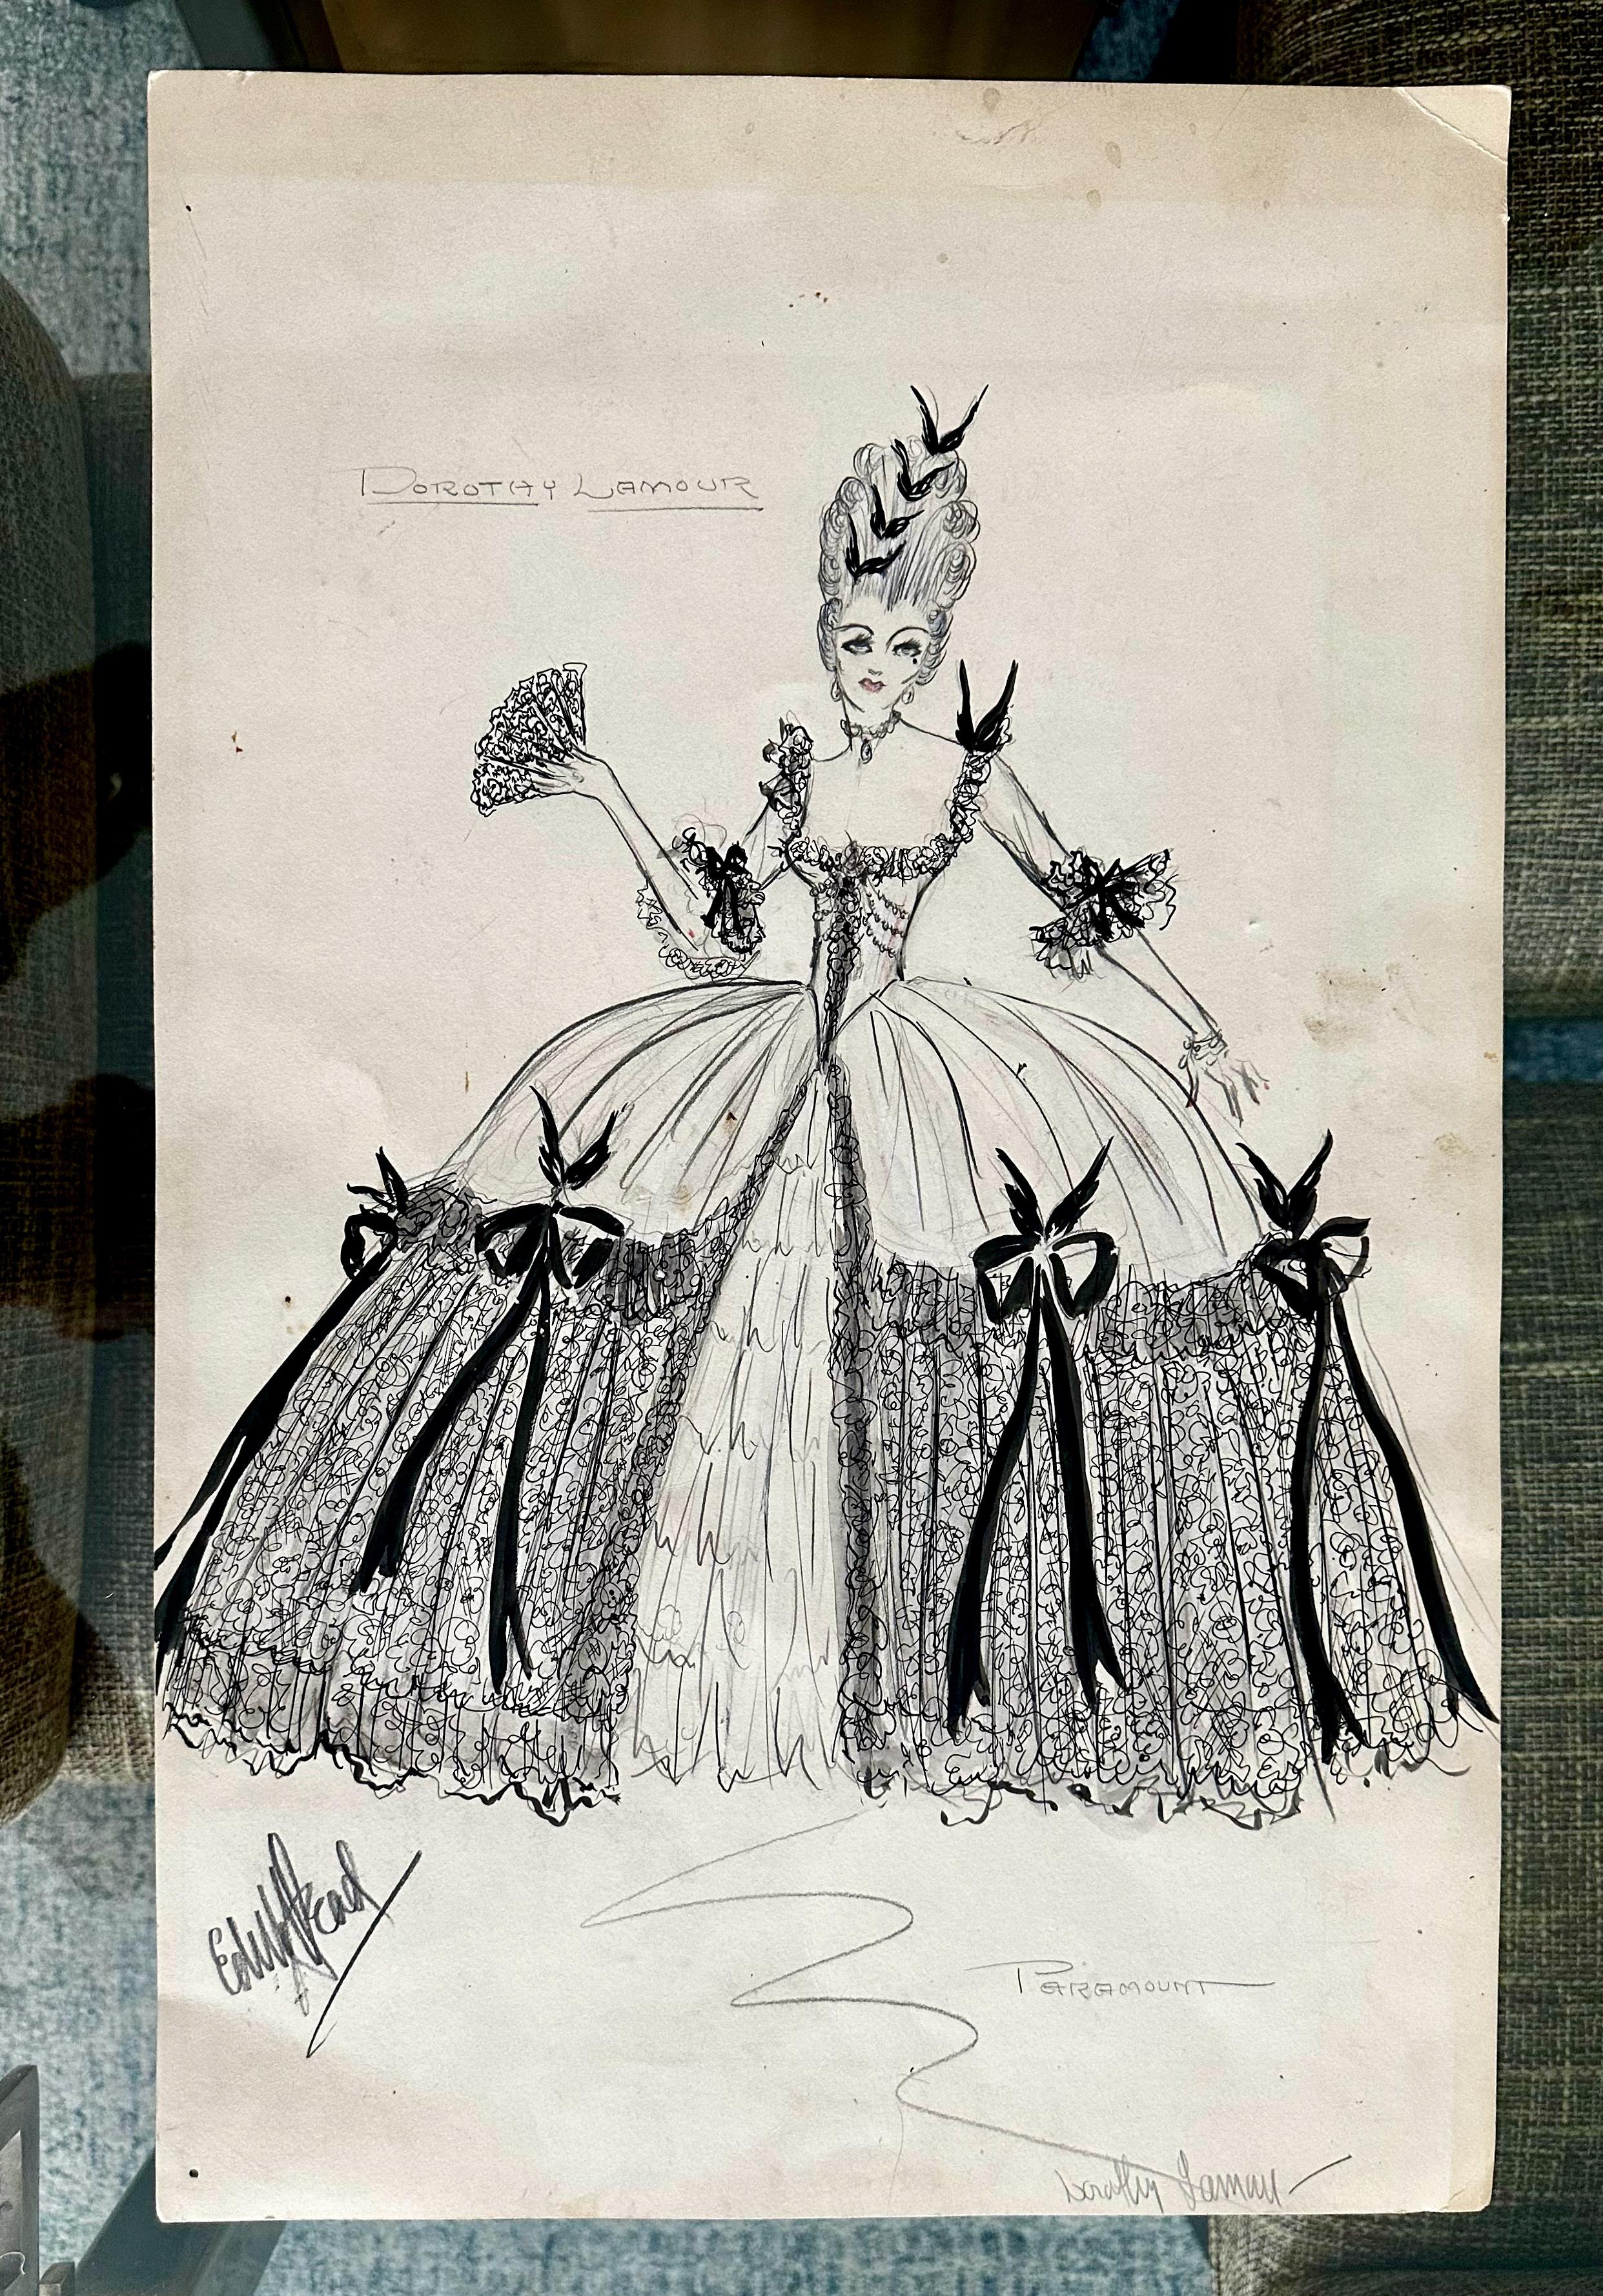 Unique and rare opportunity to own an original mixed medium costume sketch drawn by the famous costume designer Edith Head, at Paramount Studios. The drawing was done for Dorothy Lamour and is one of her earliest design sketches circa early 1940s.